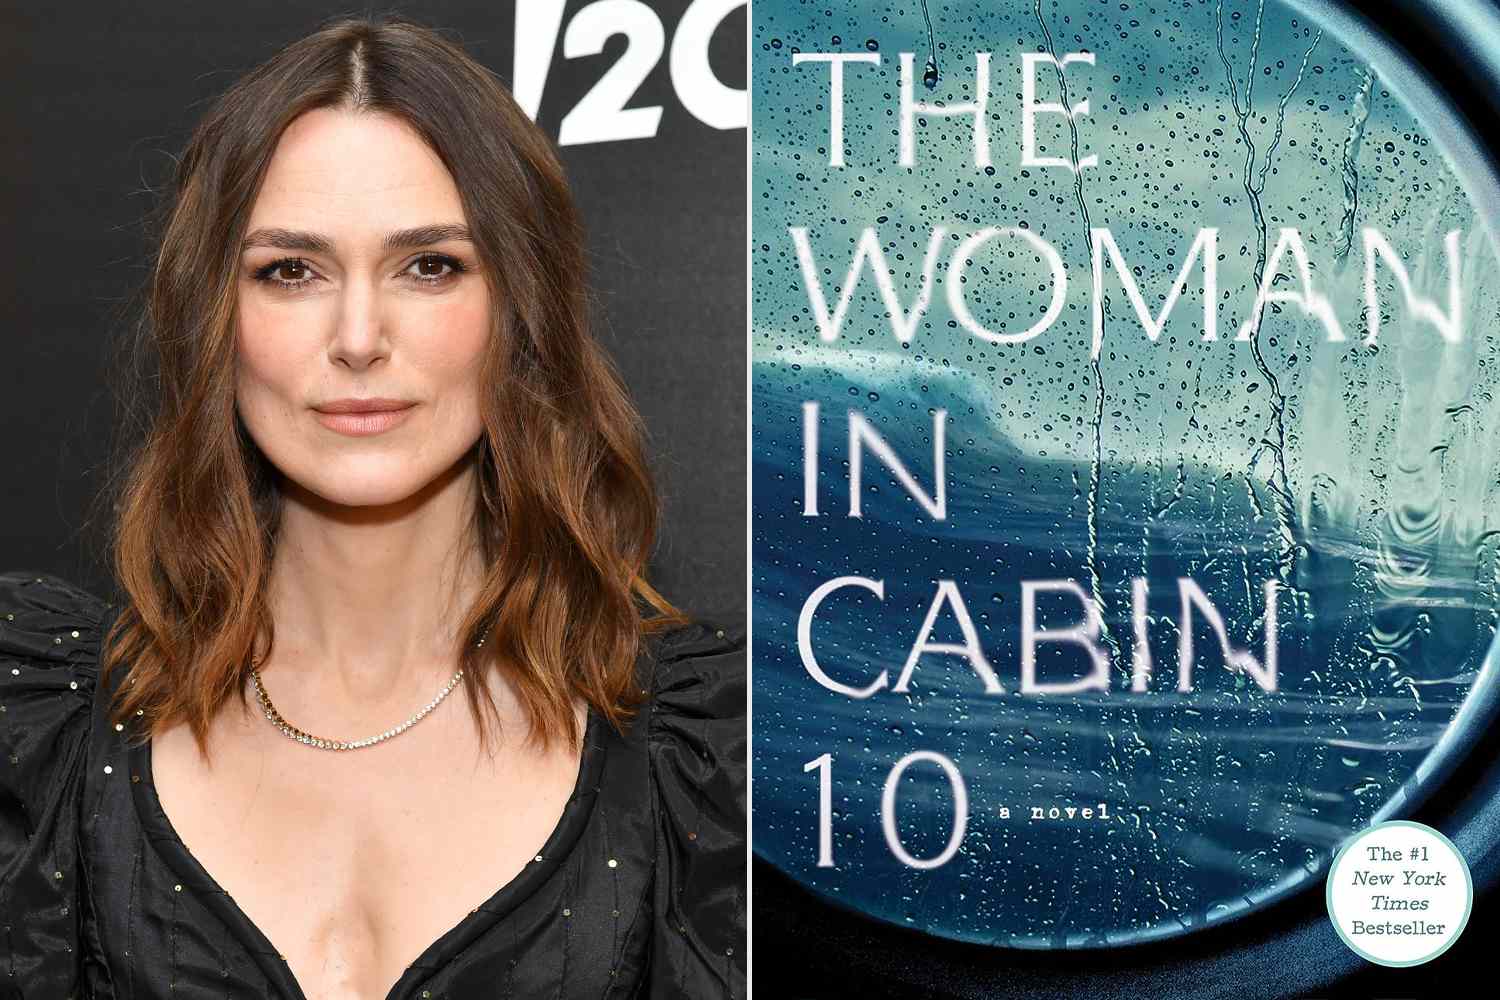 Keira Knightley to Star in Movie Adaptation of 'The Woman in Cabin 10' Novel by Ruth Ware